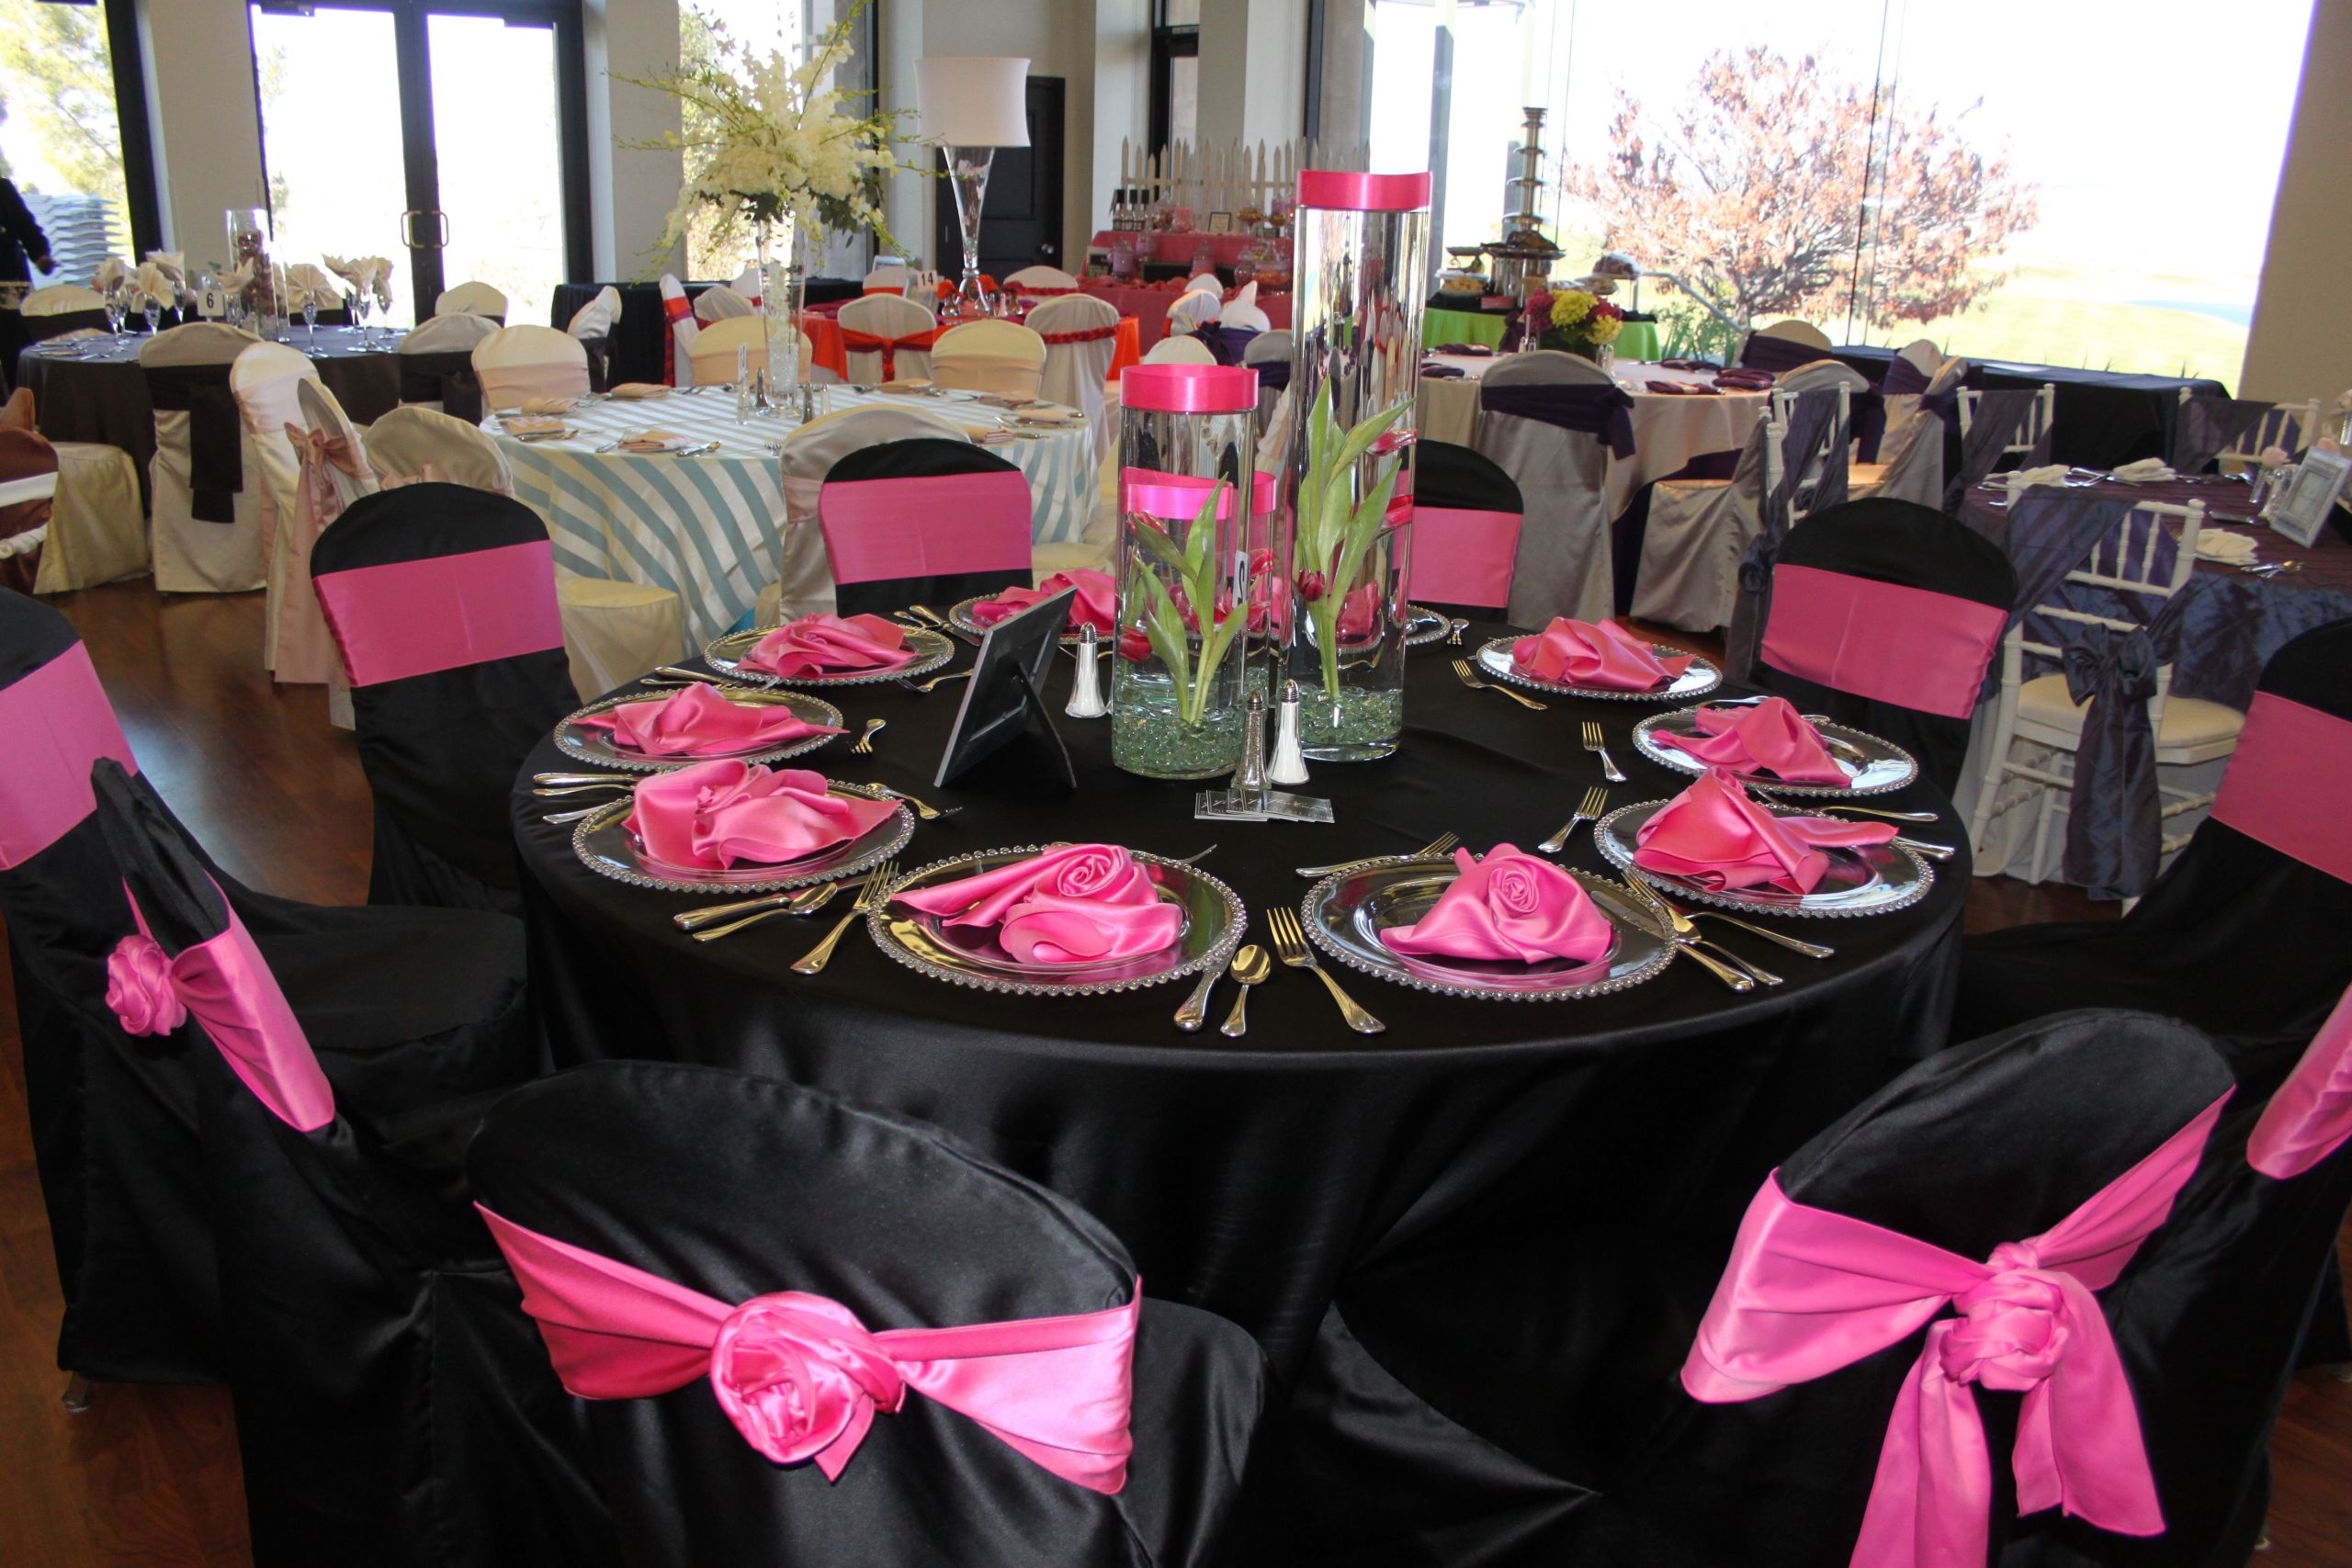 Graduation Party Table Setting Ideas
 Pink & Black table setup Graduation Party Ideas